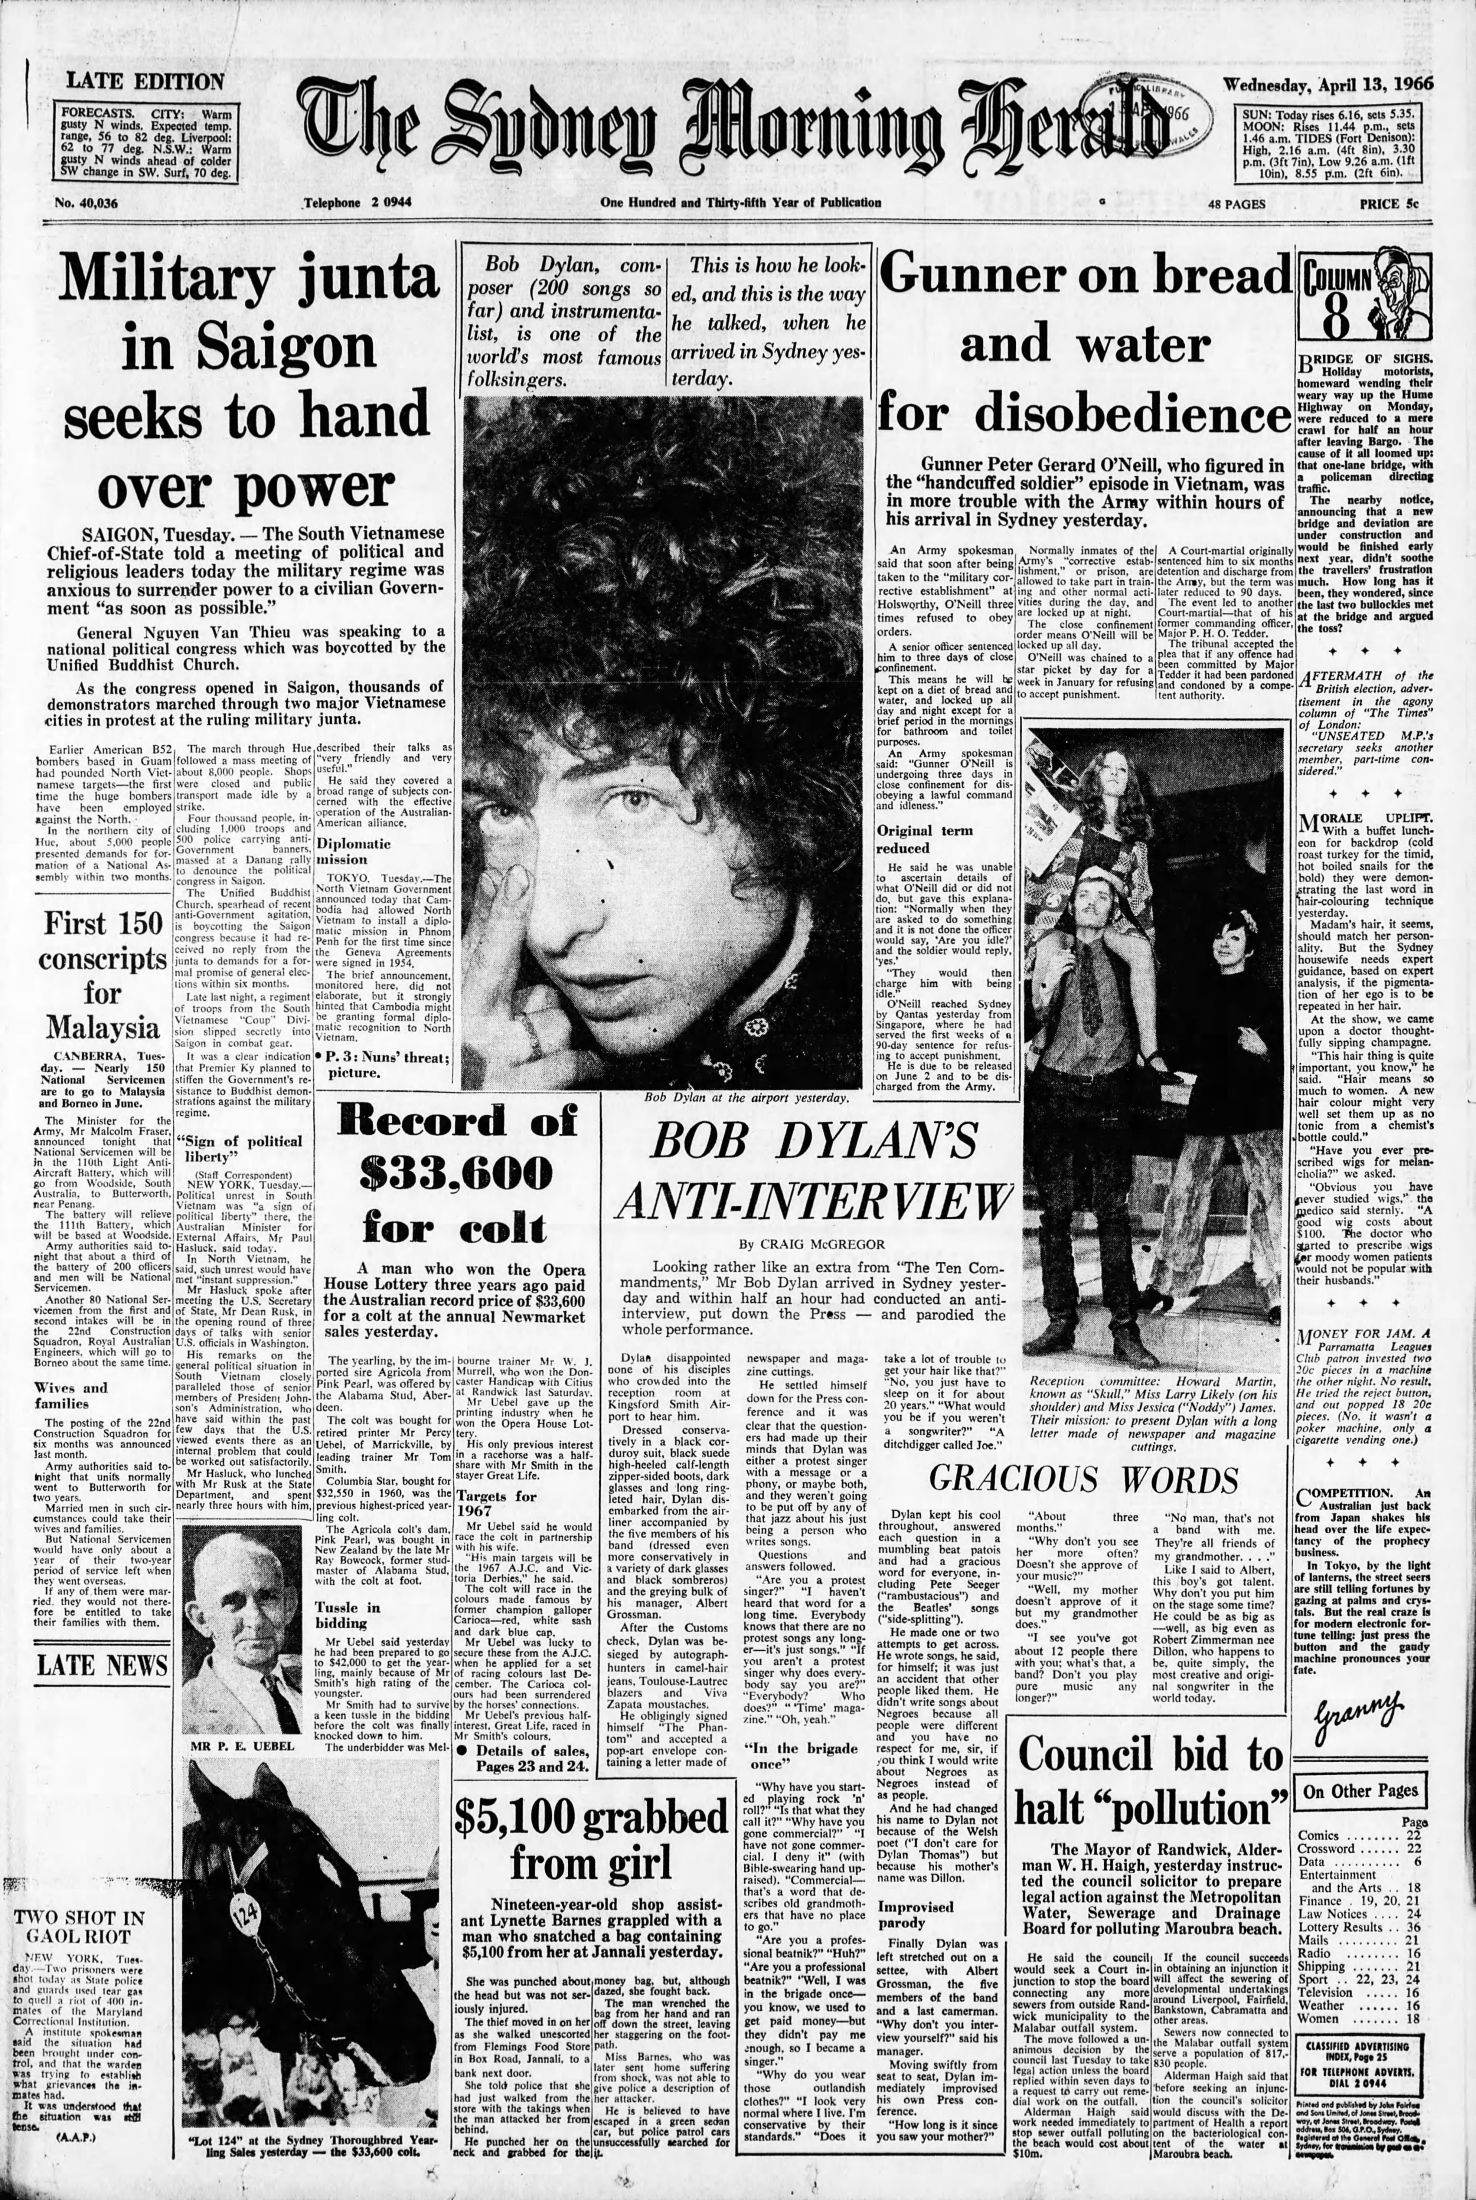 the sydney morning herald 1966 Bob Dylan cover story